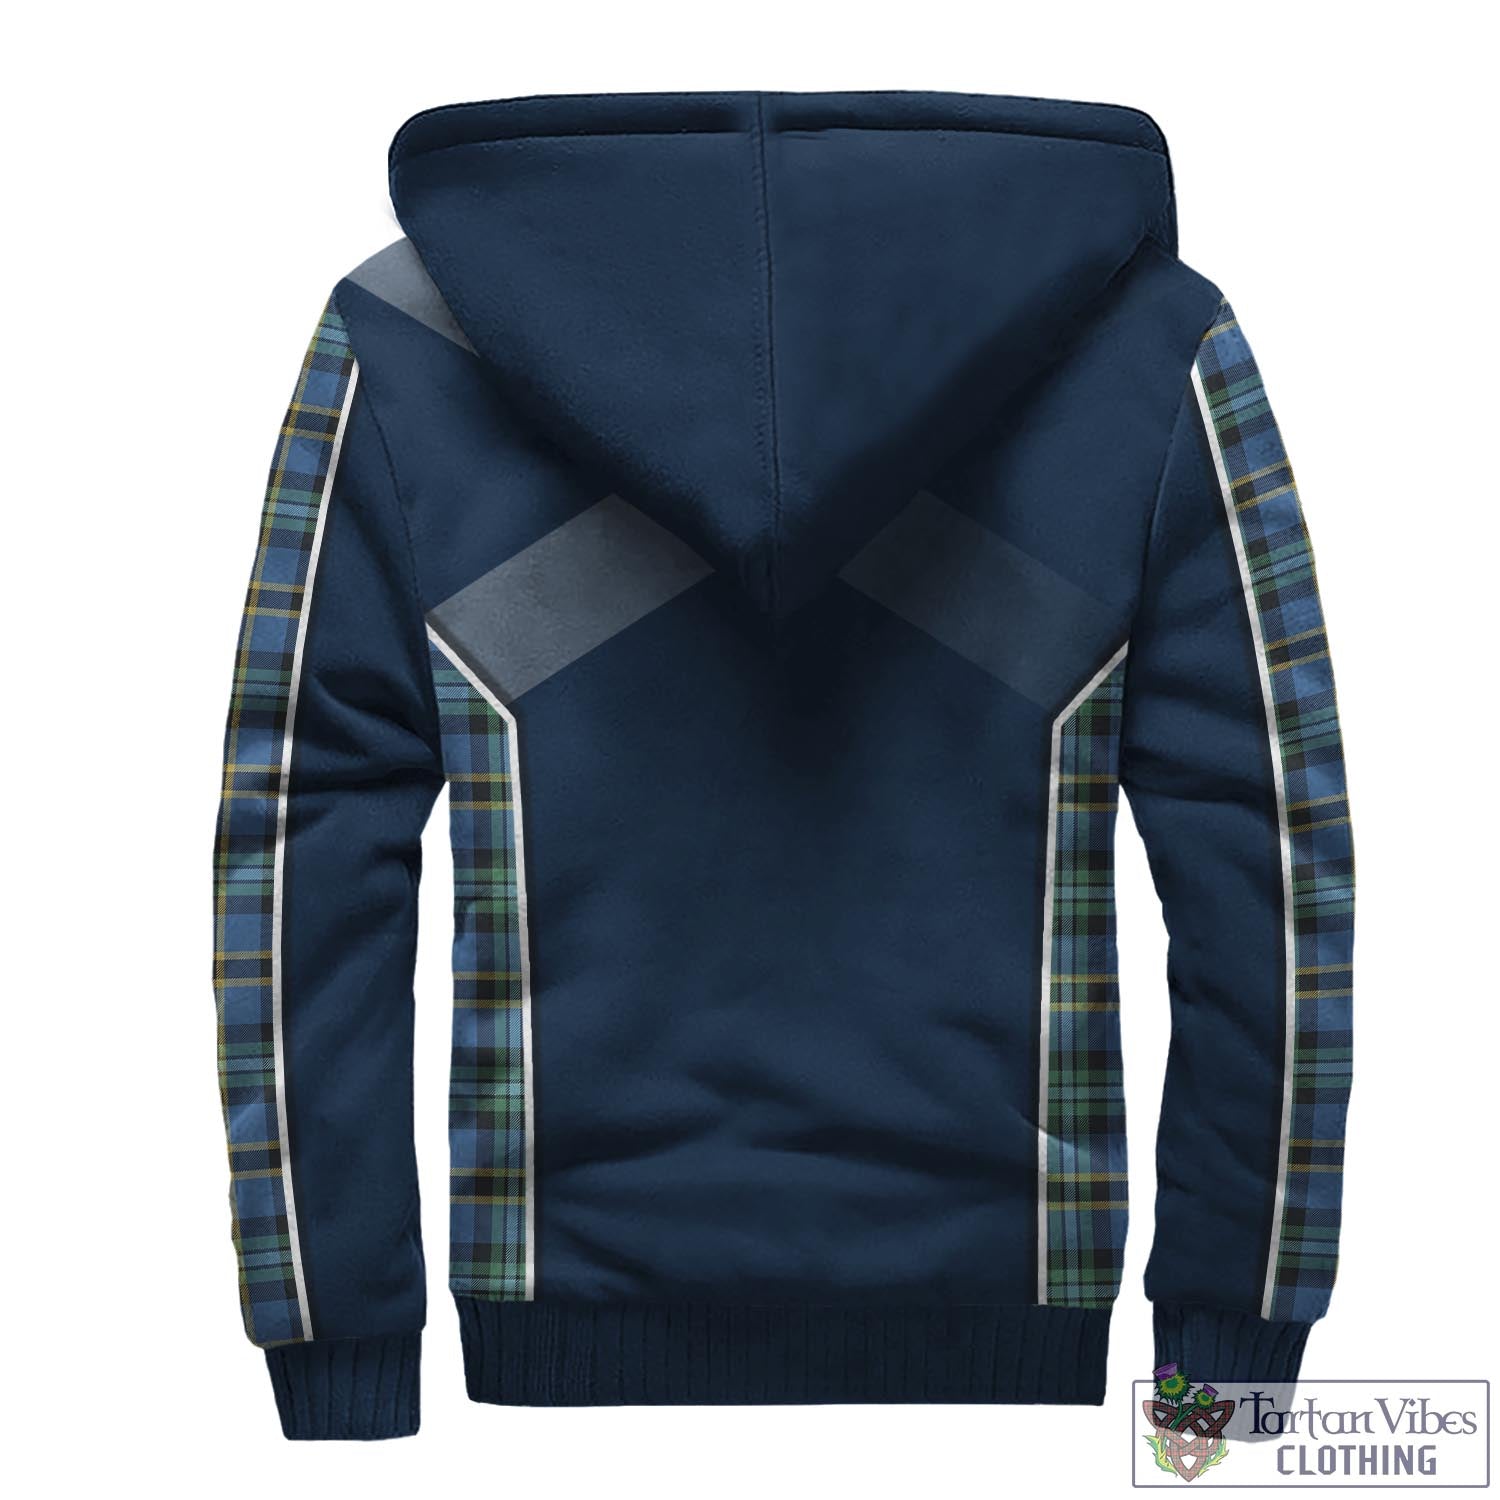 Tartan Vibes Clothing Weir Ancient Tartan Sherpa Hoodie with Family Crest and Scottish Thistle Vibes Sport Style